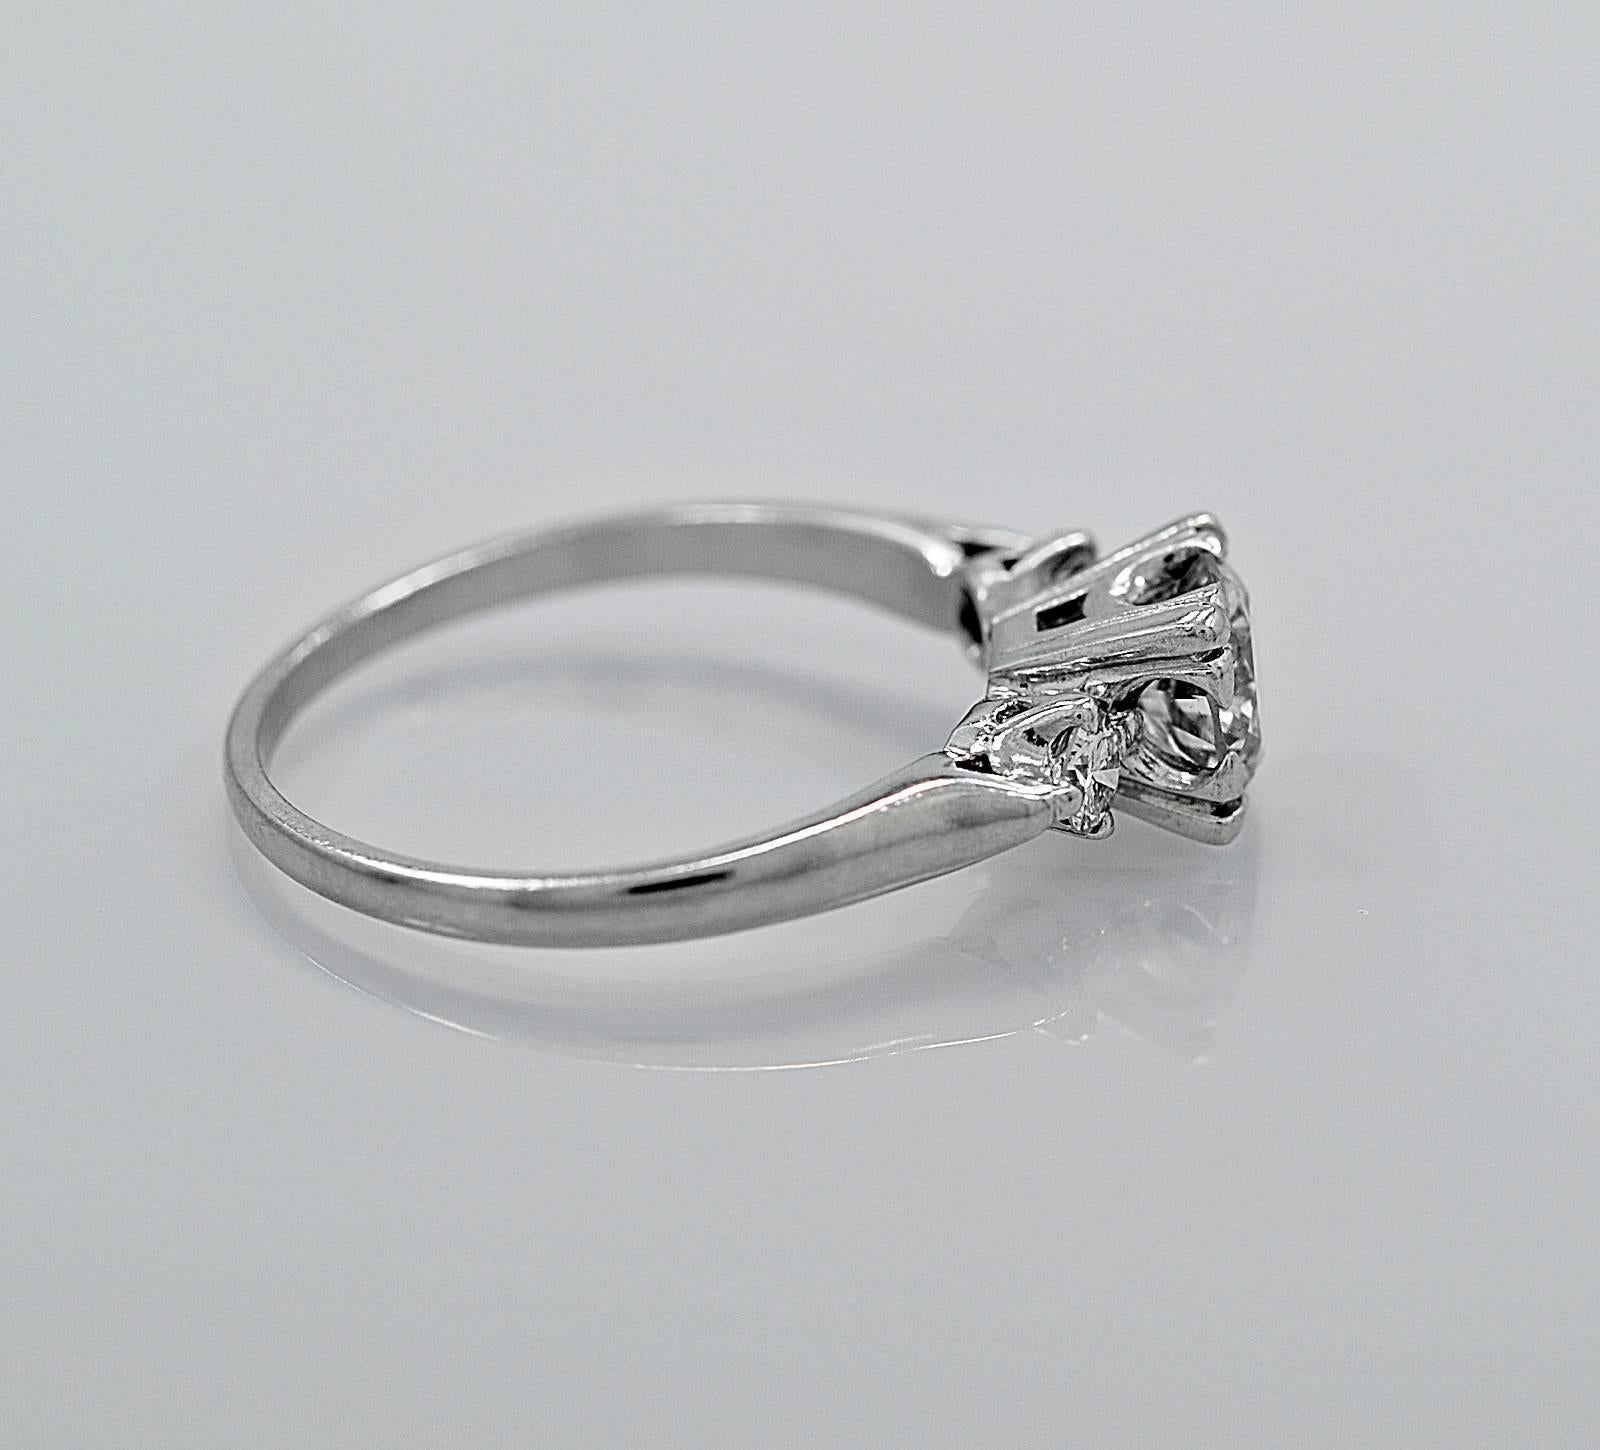 A classic style with a timeless design, this antique engagement ring remains a highly desired 